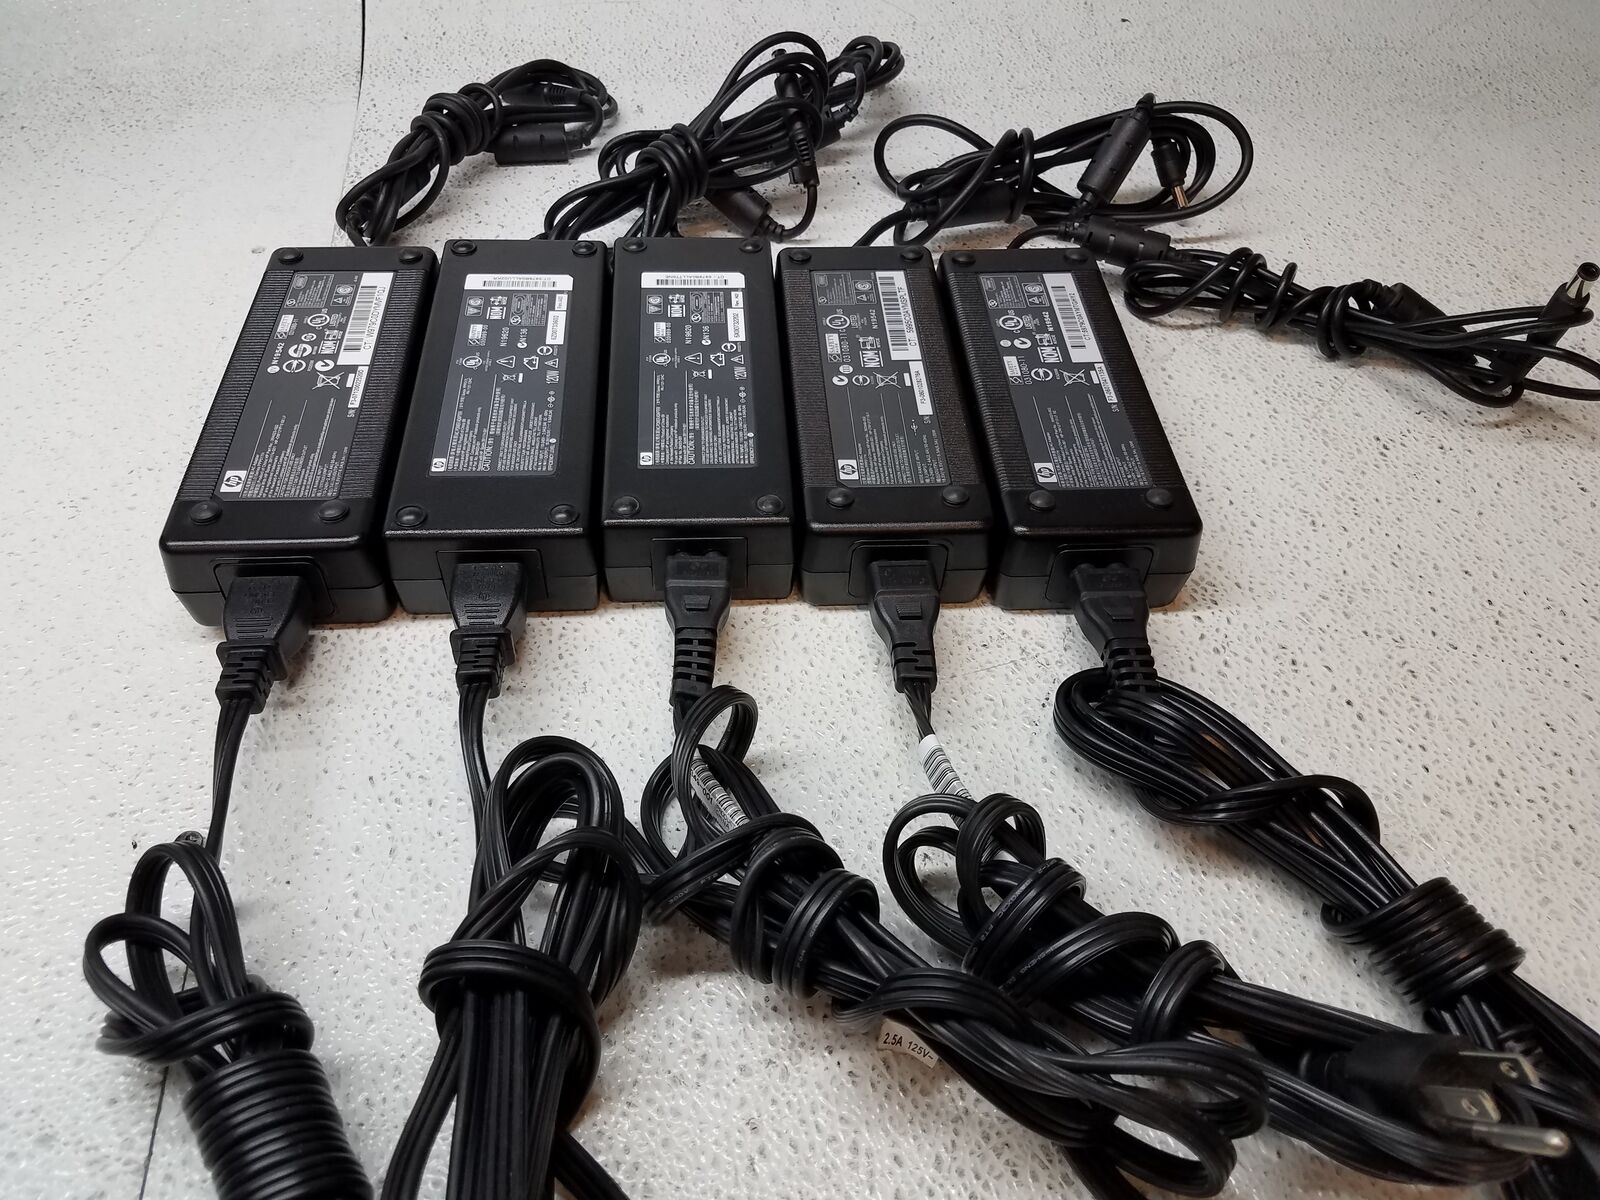 Lot of 5 Genuine HP 18.5v 6.5A 120W AC Power Adapters PPP017H PPP017L Black Tip